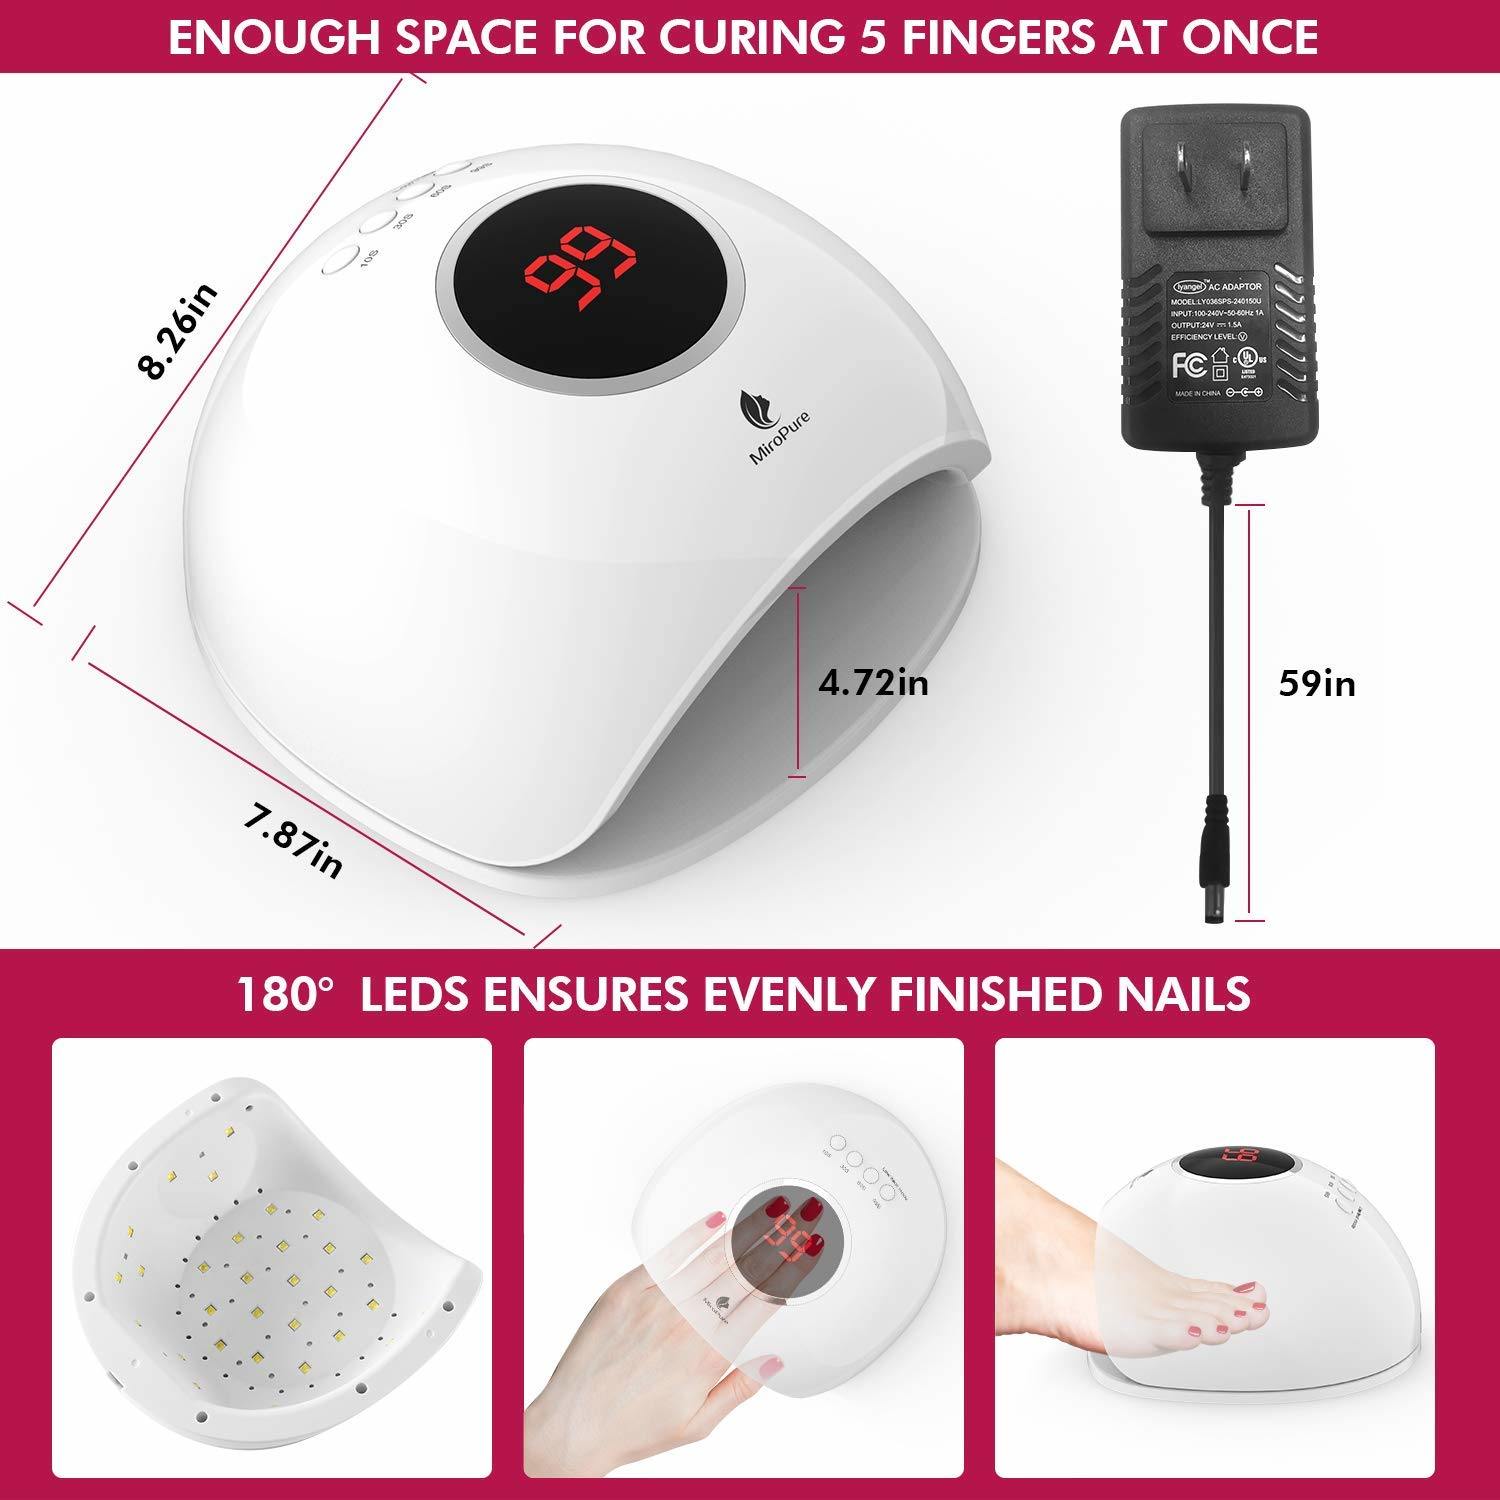 MiroPure UV LED Gel Nail Lamp Light Dryer, Fast Dry 48w Professional Nail Dryer